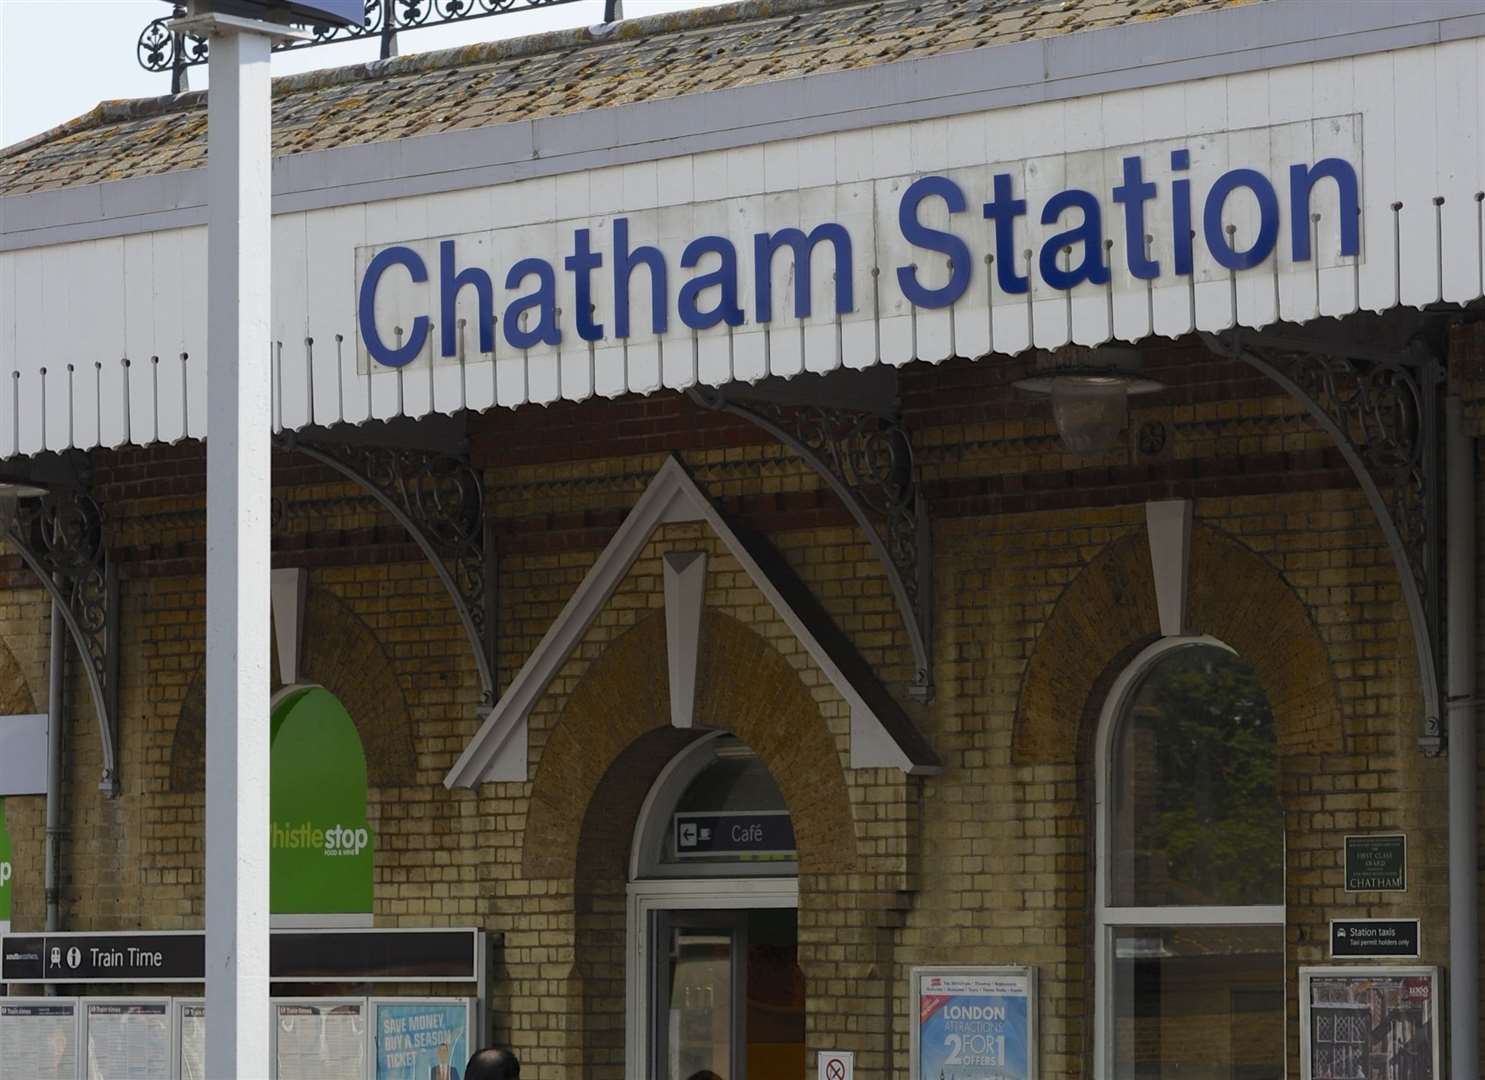 Twenty-two people were searched at Chatham railway station during the week. Picture: Andy Payton